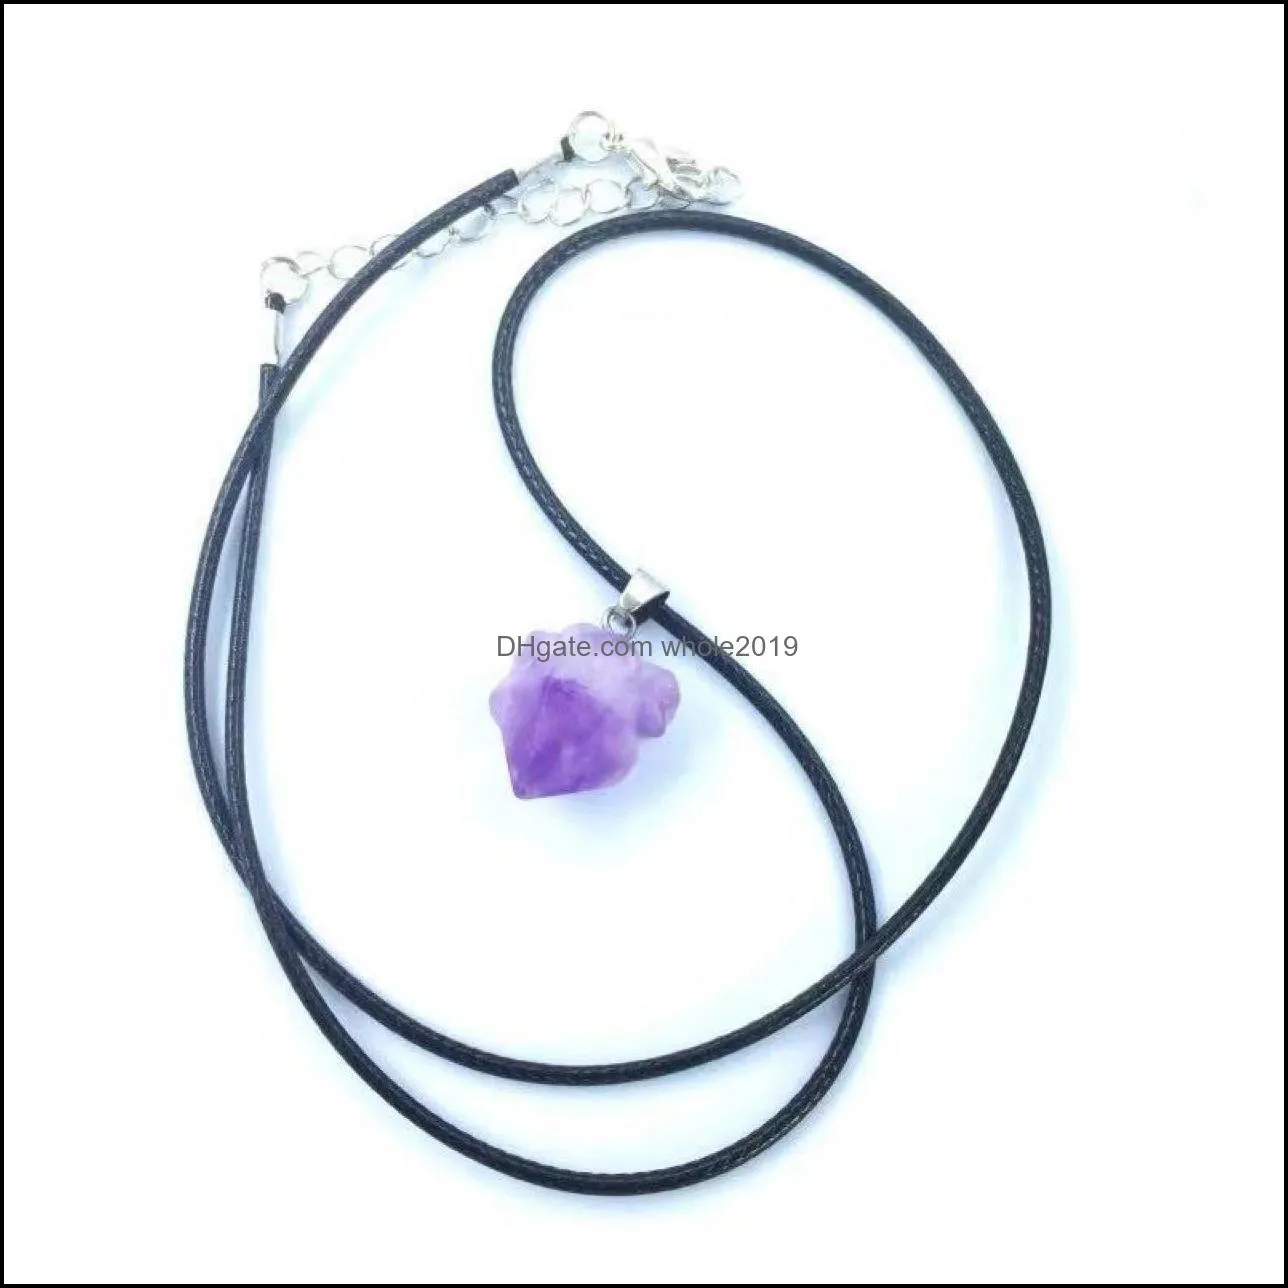 bulk natural crystal stone charms amethyst irregular shape pendants for necklace earrings jewelry makin whole2019